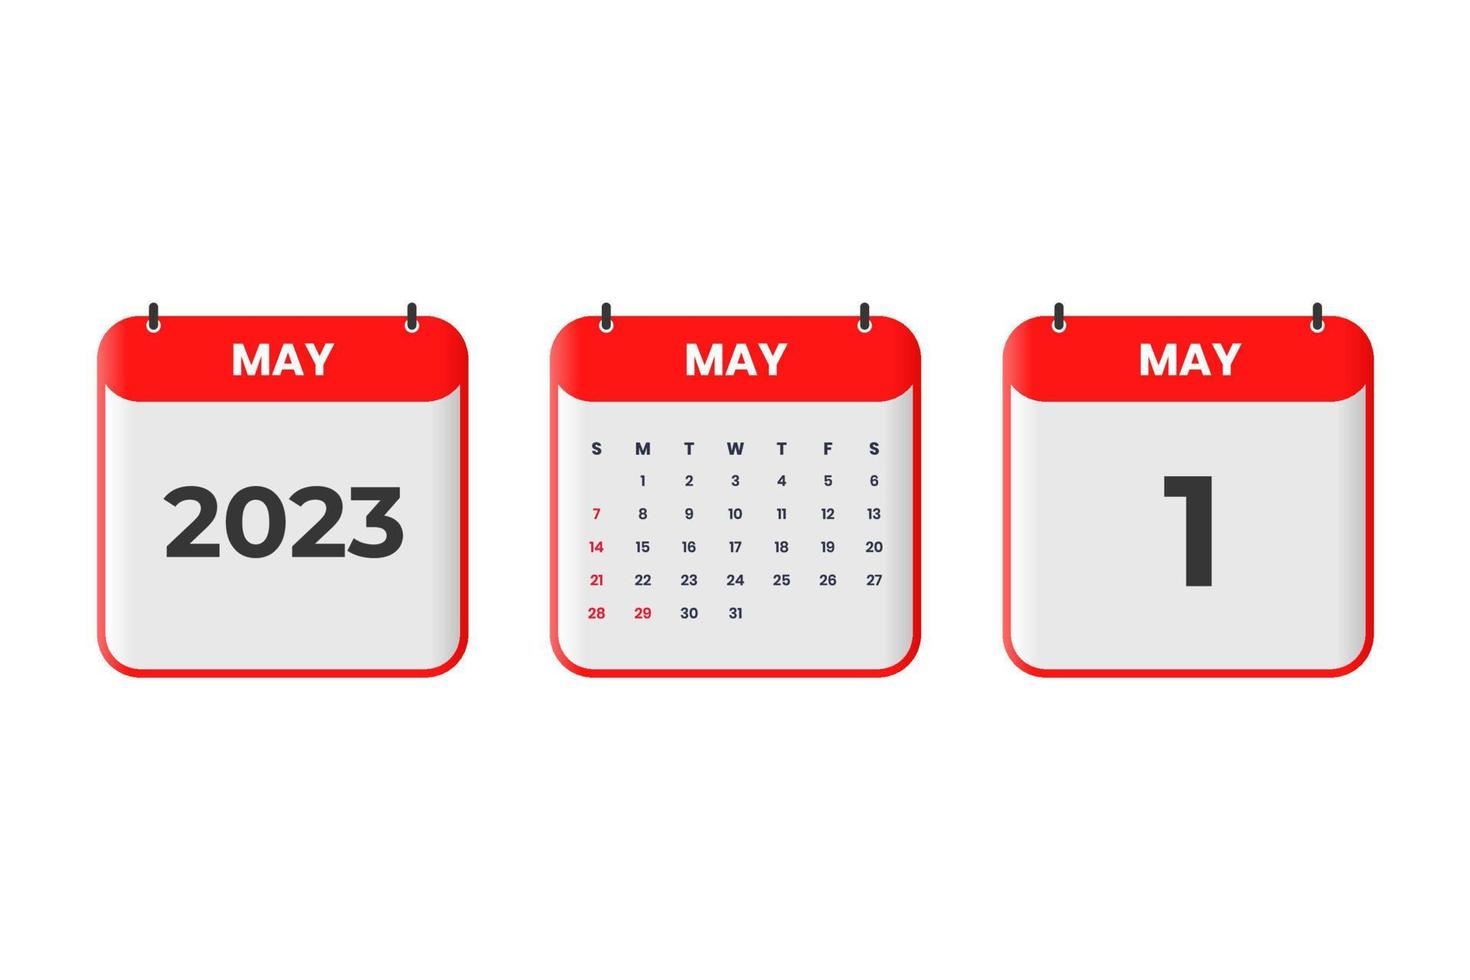 May 2023 calendar design. 1st May 2023 calendar icon for schedule, appointment, important date concept vector